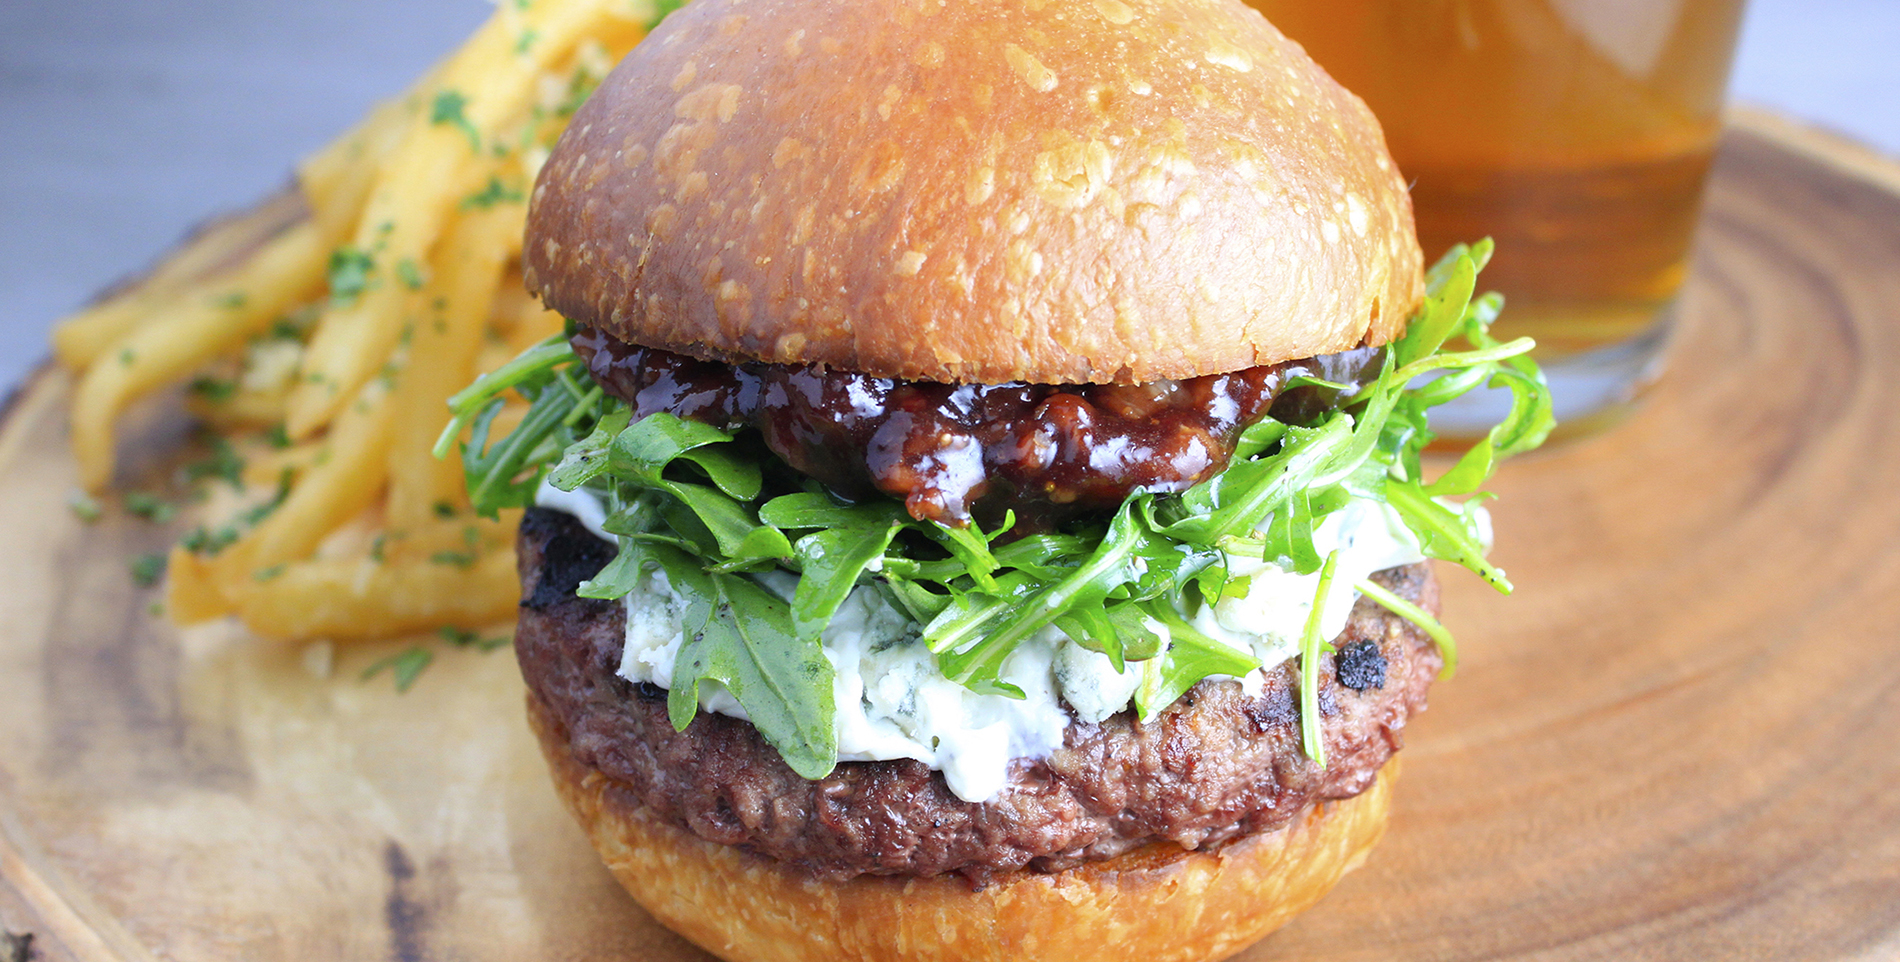 Pubhouse burger featuring Haliburton Bacon and Fig Compote, and Gorgonzola Cheese Spread